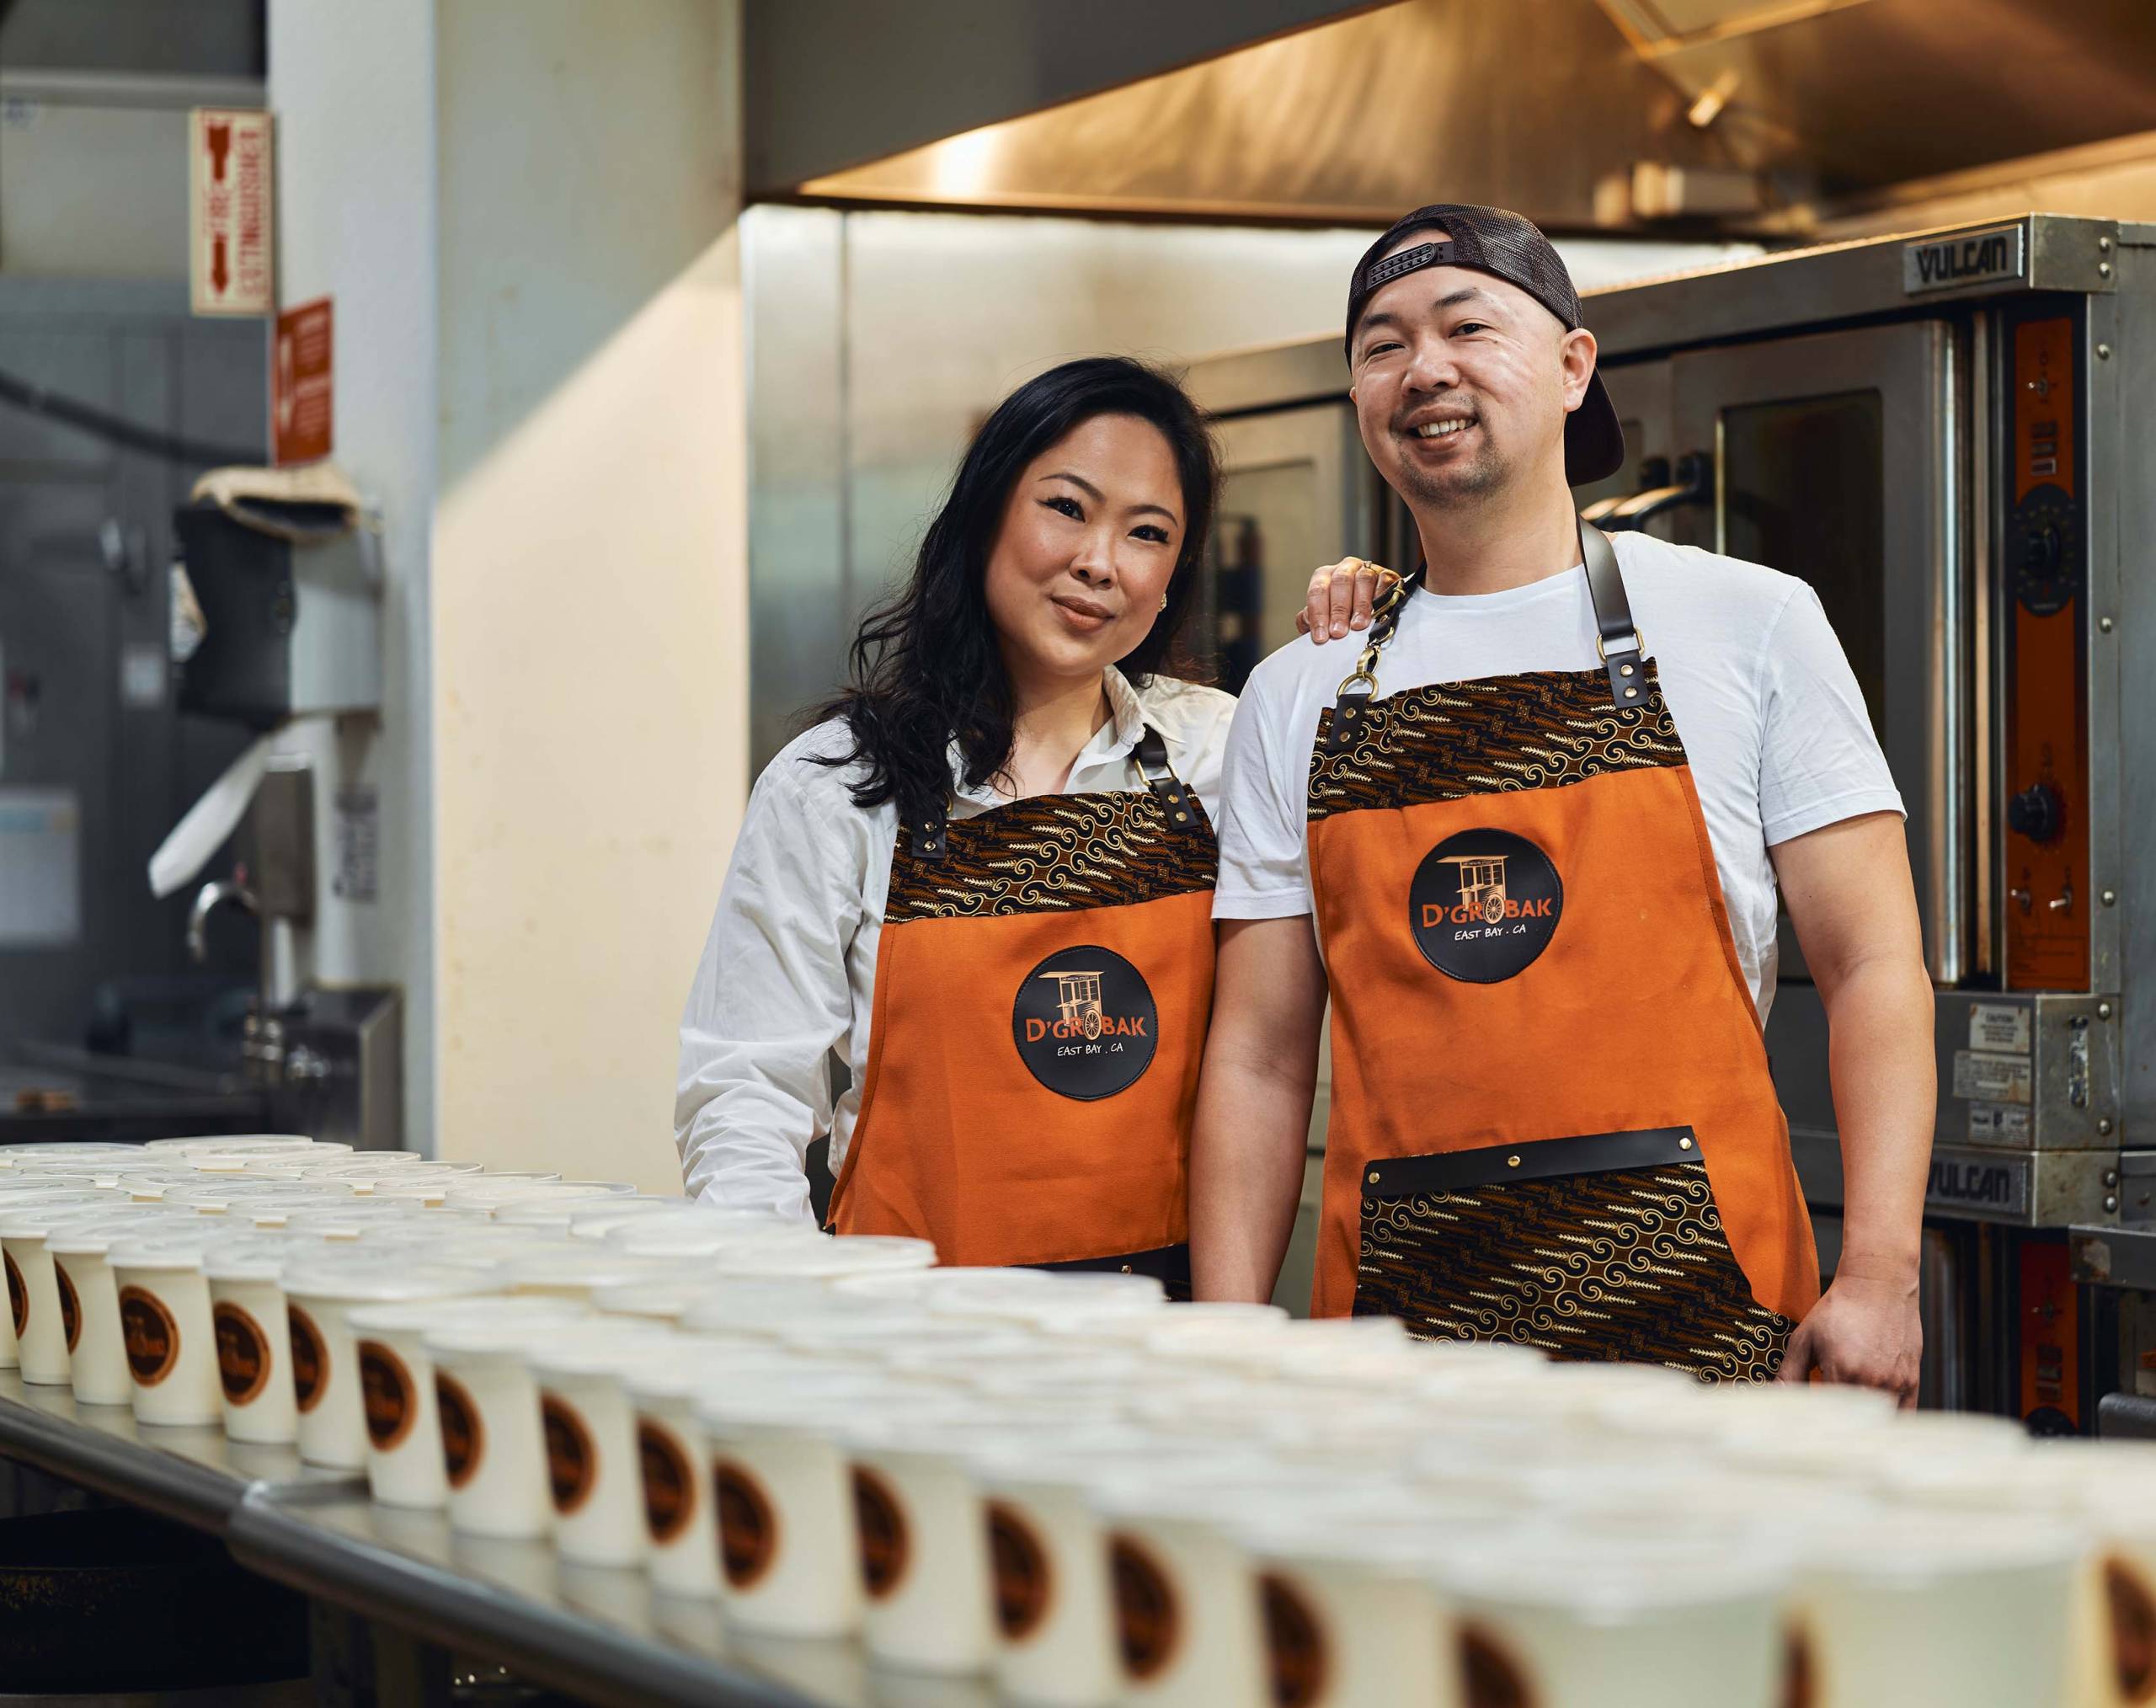 Two chefs in orange and brown aprons pose in their kitchen in front of many empty soup containers.